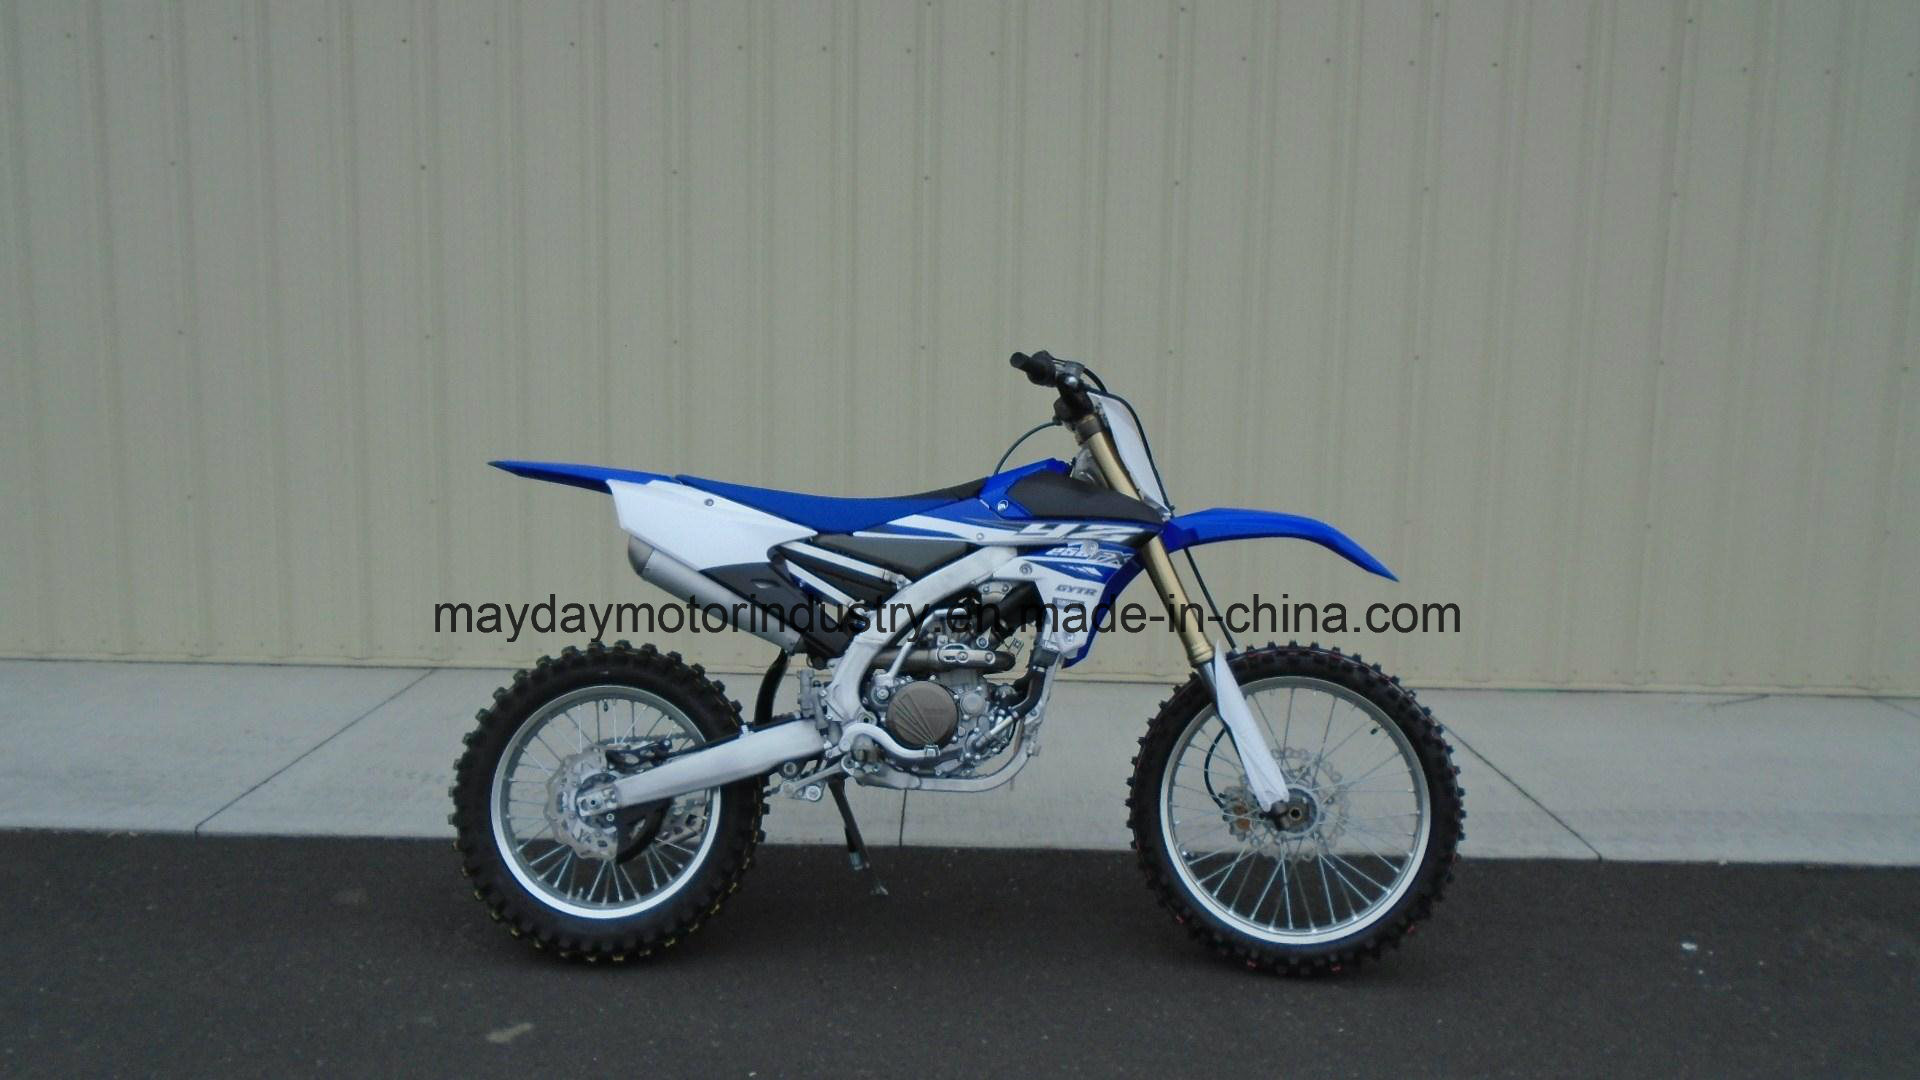 Cheap New 2015 Yama Yz250fx off Road Motorcycle